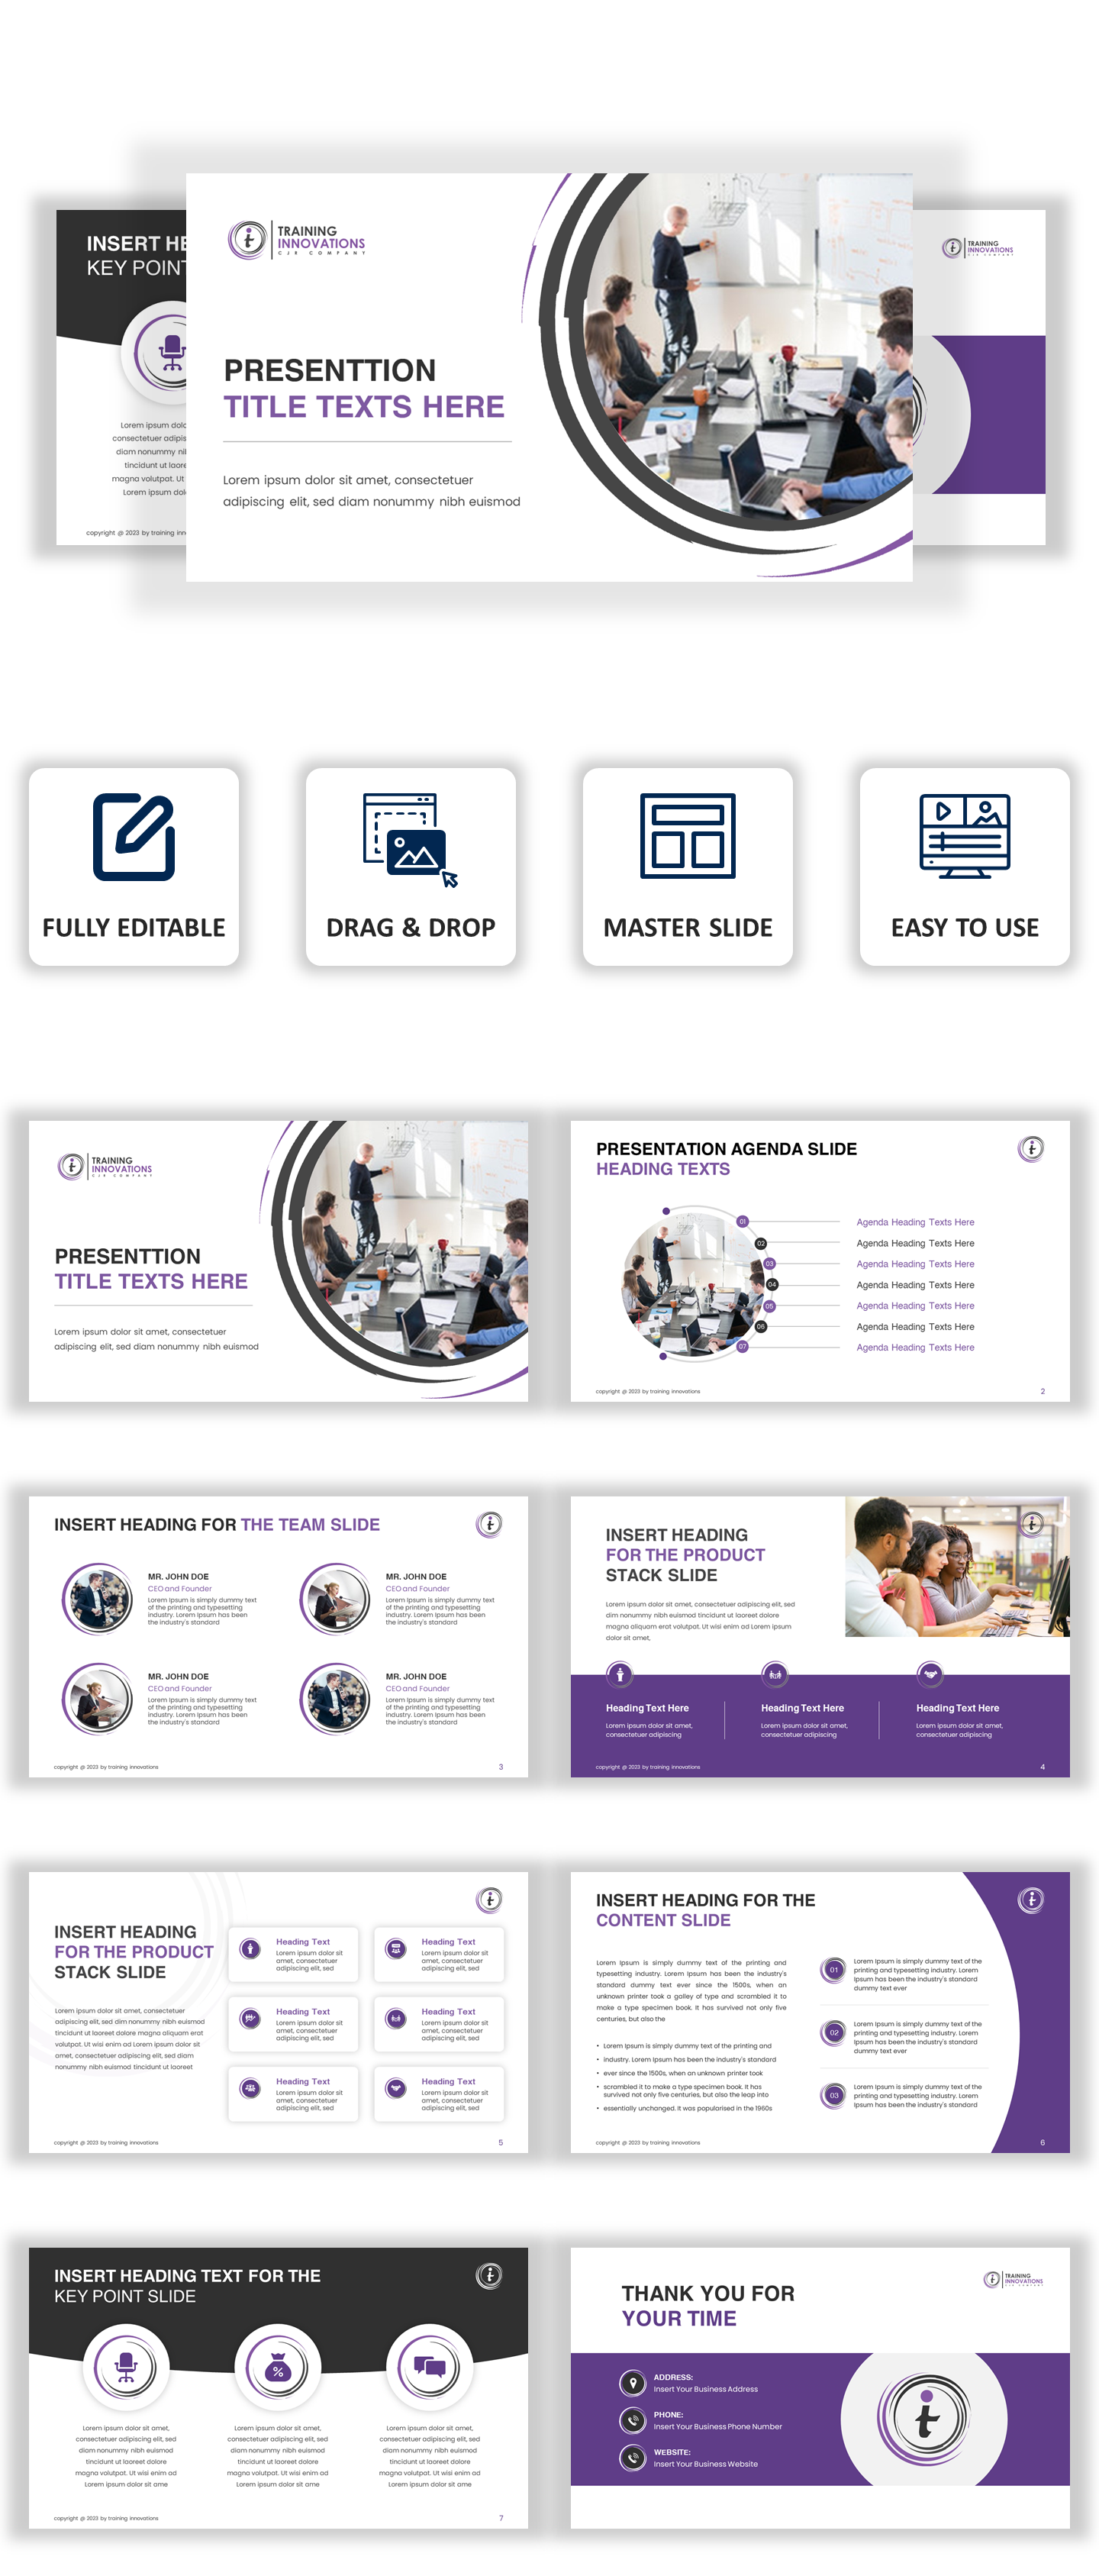 PowerPoint template for training and course development company